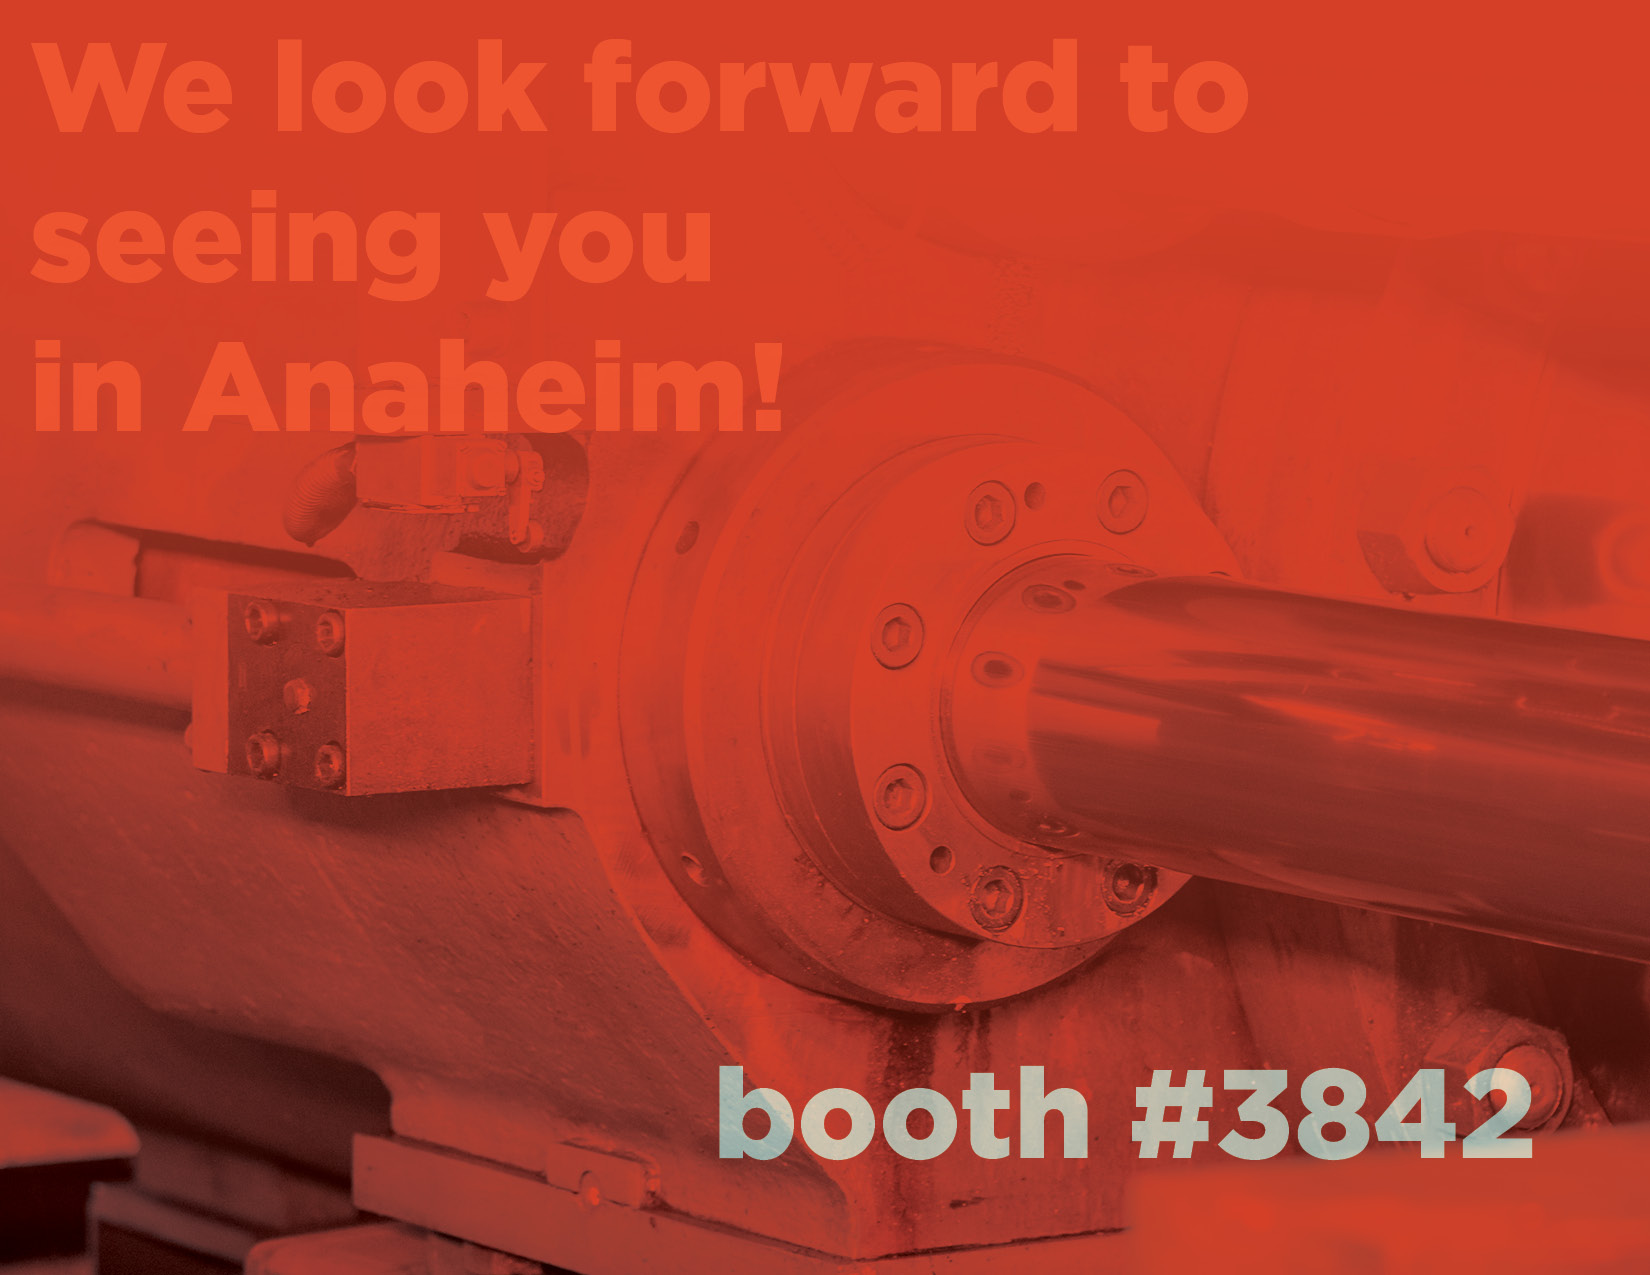 PlastecWest2022-We look forward to seeing you in Anaheim! Booth #3842